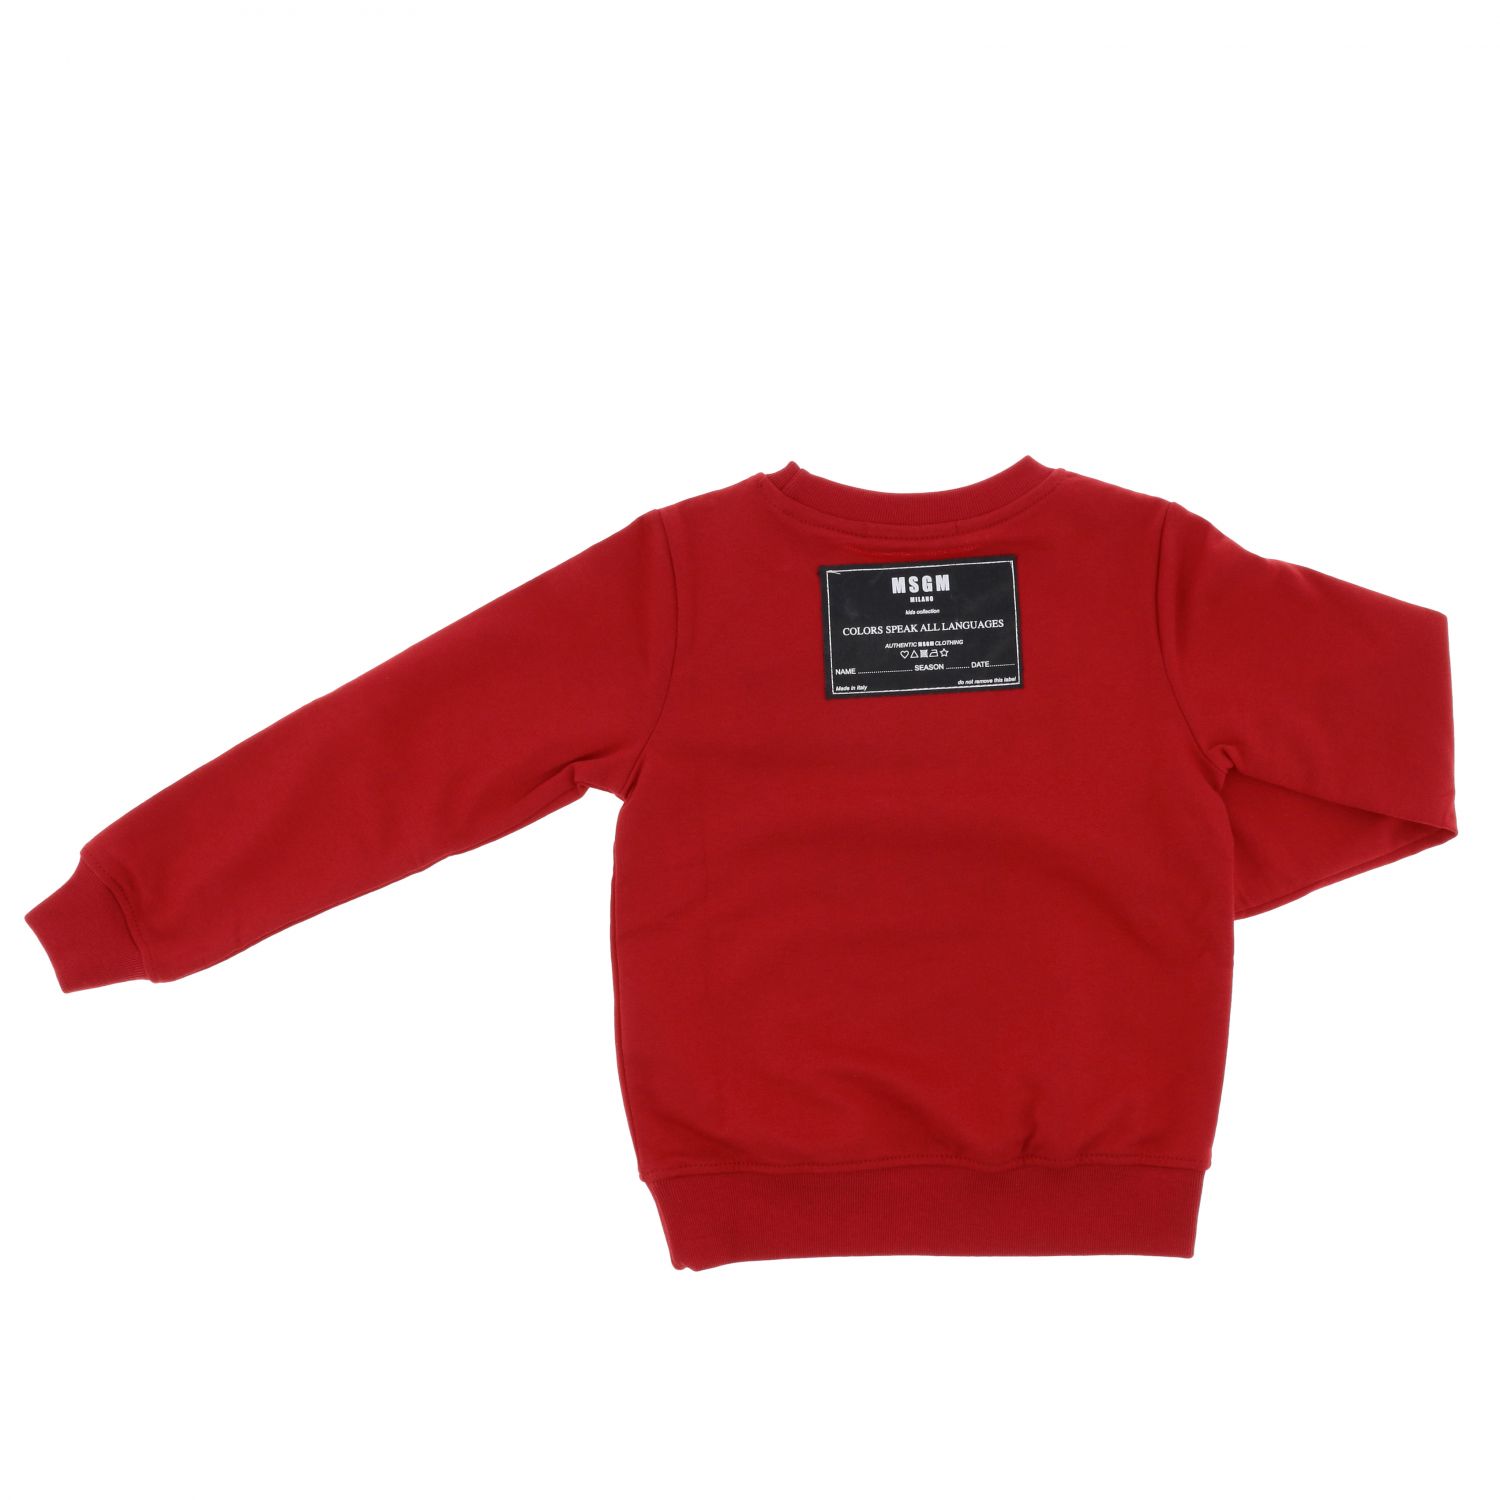 Msgm Kids Outlet: sweater for girls - Red | Msgm Kids sweater 18605 ...